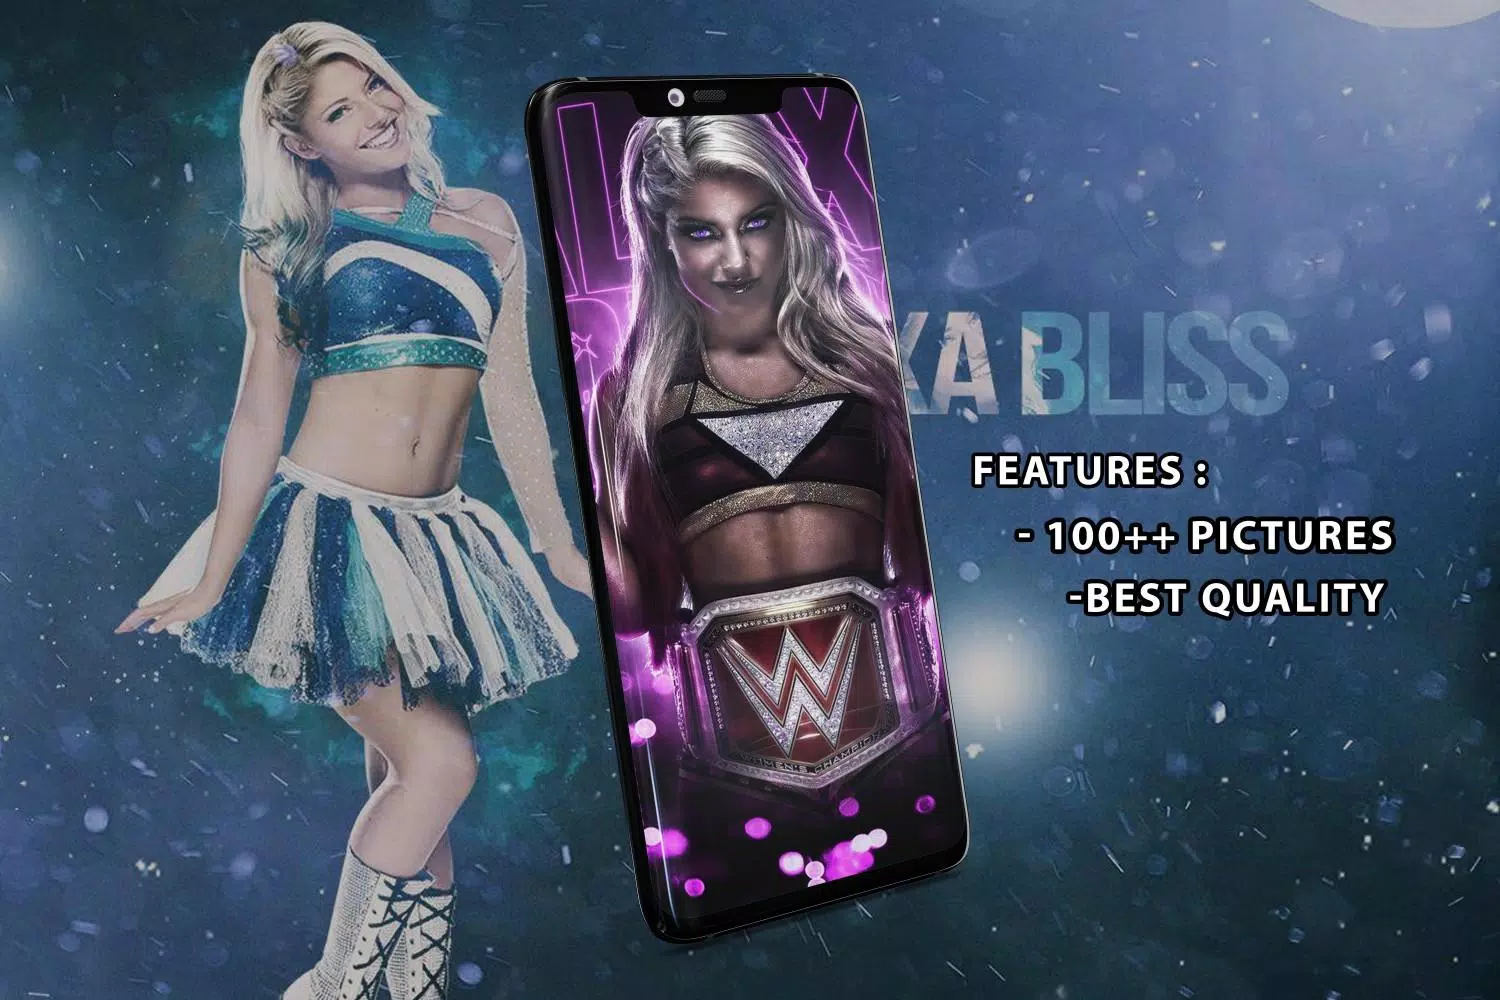 WWE Alexa Bliss Wallpaper for Android - APK Download